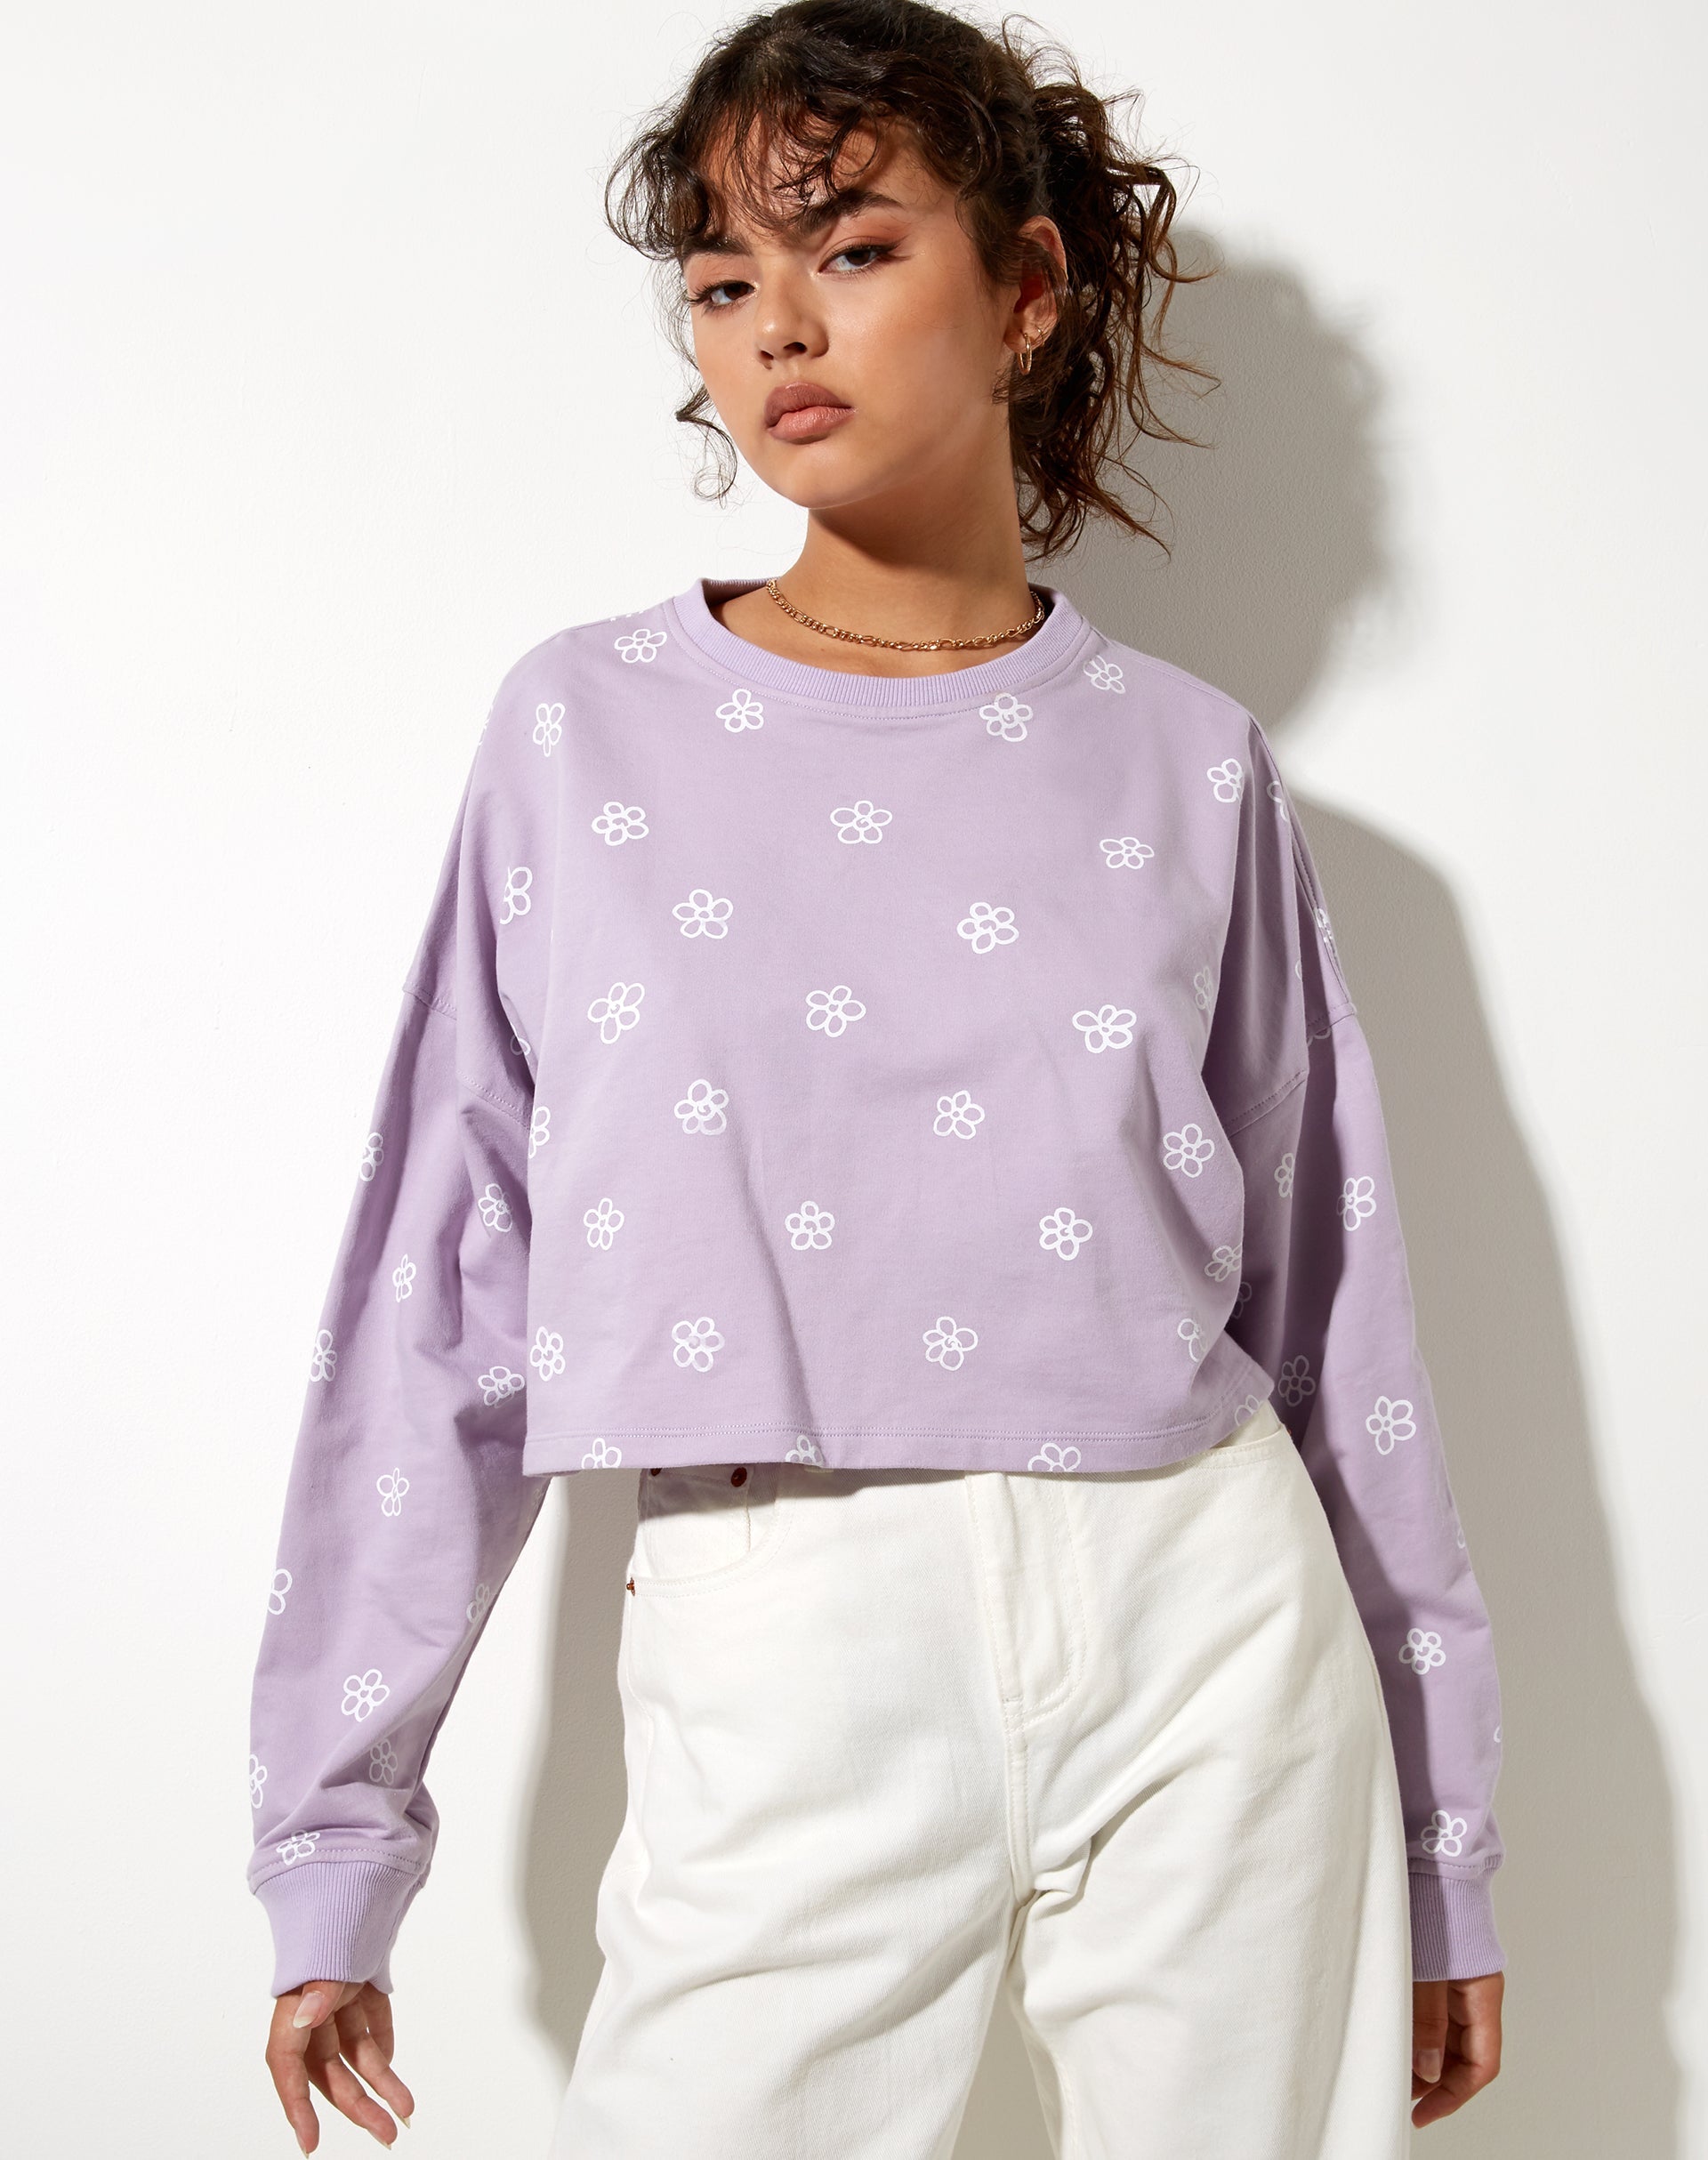 Image of Fawly Crop Top in Small Graffiti Flower Lilac